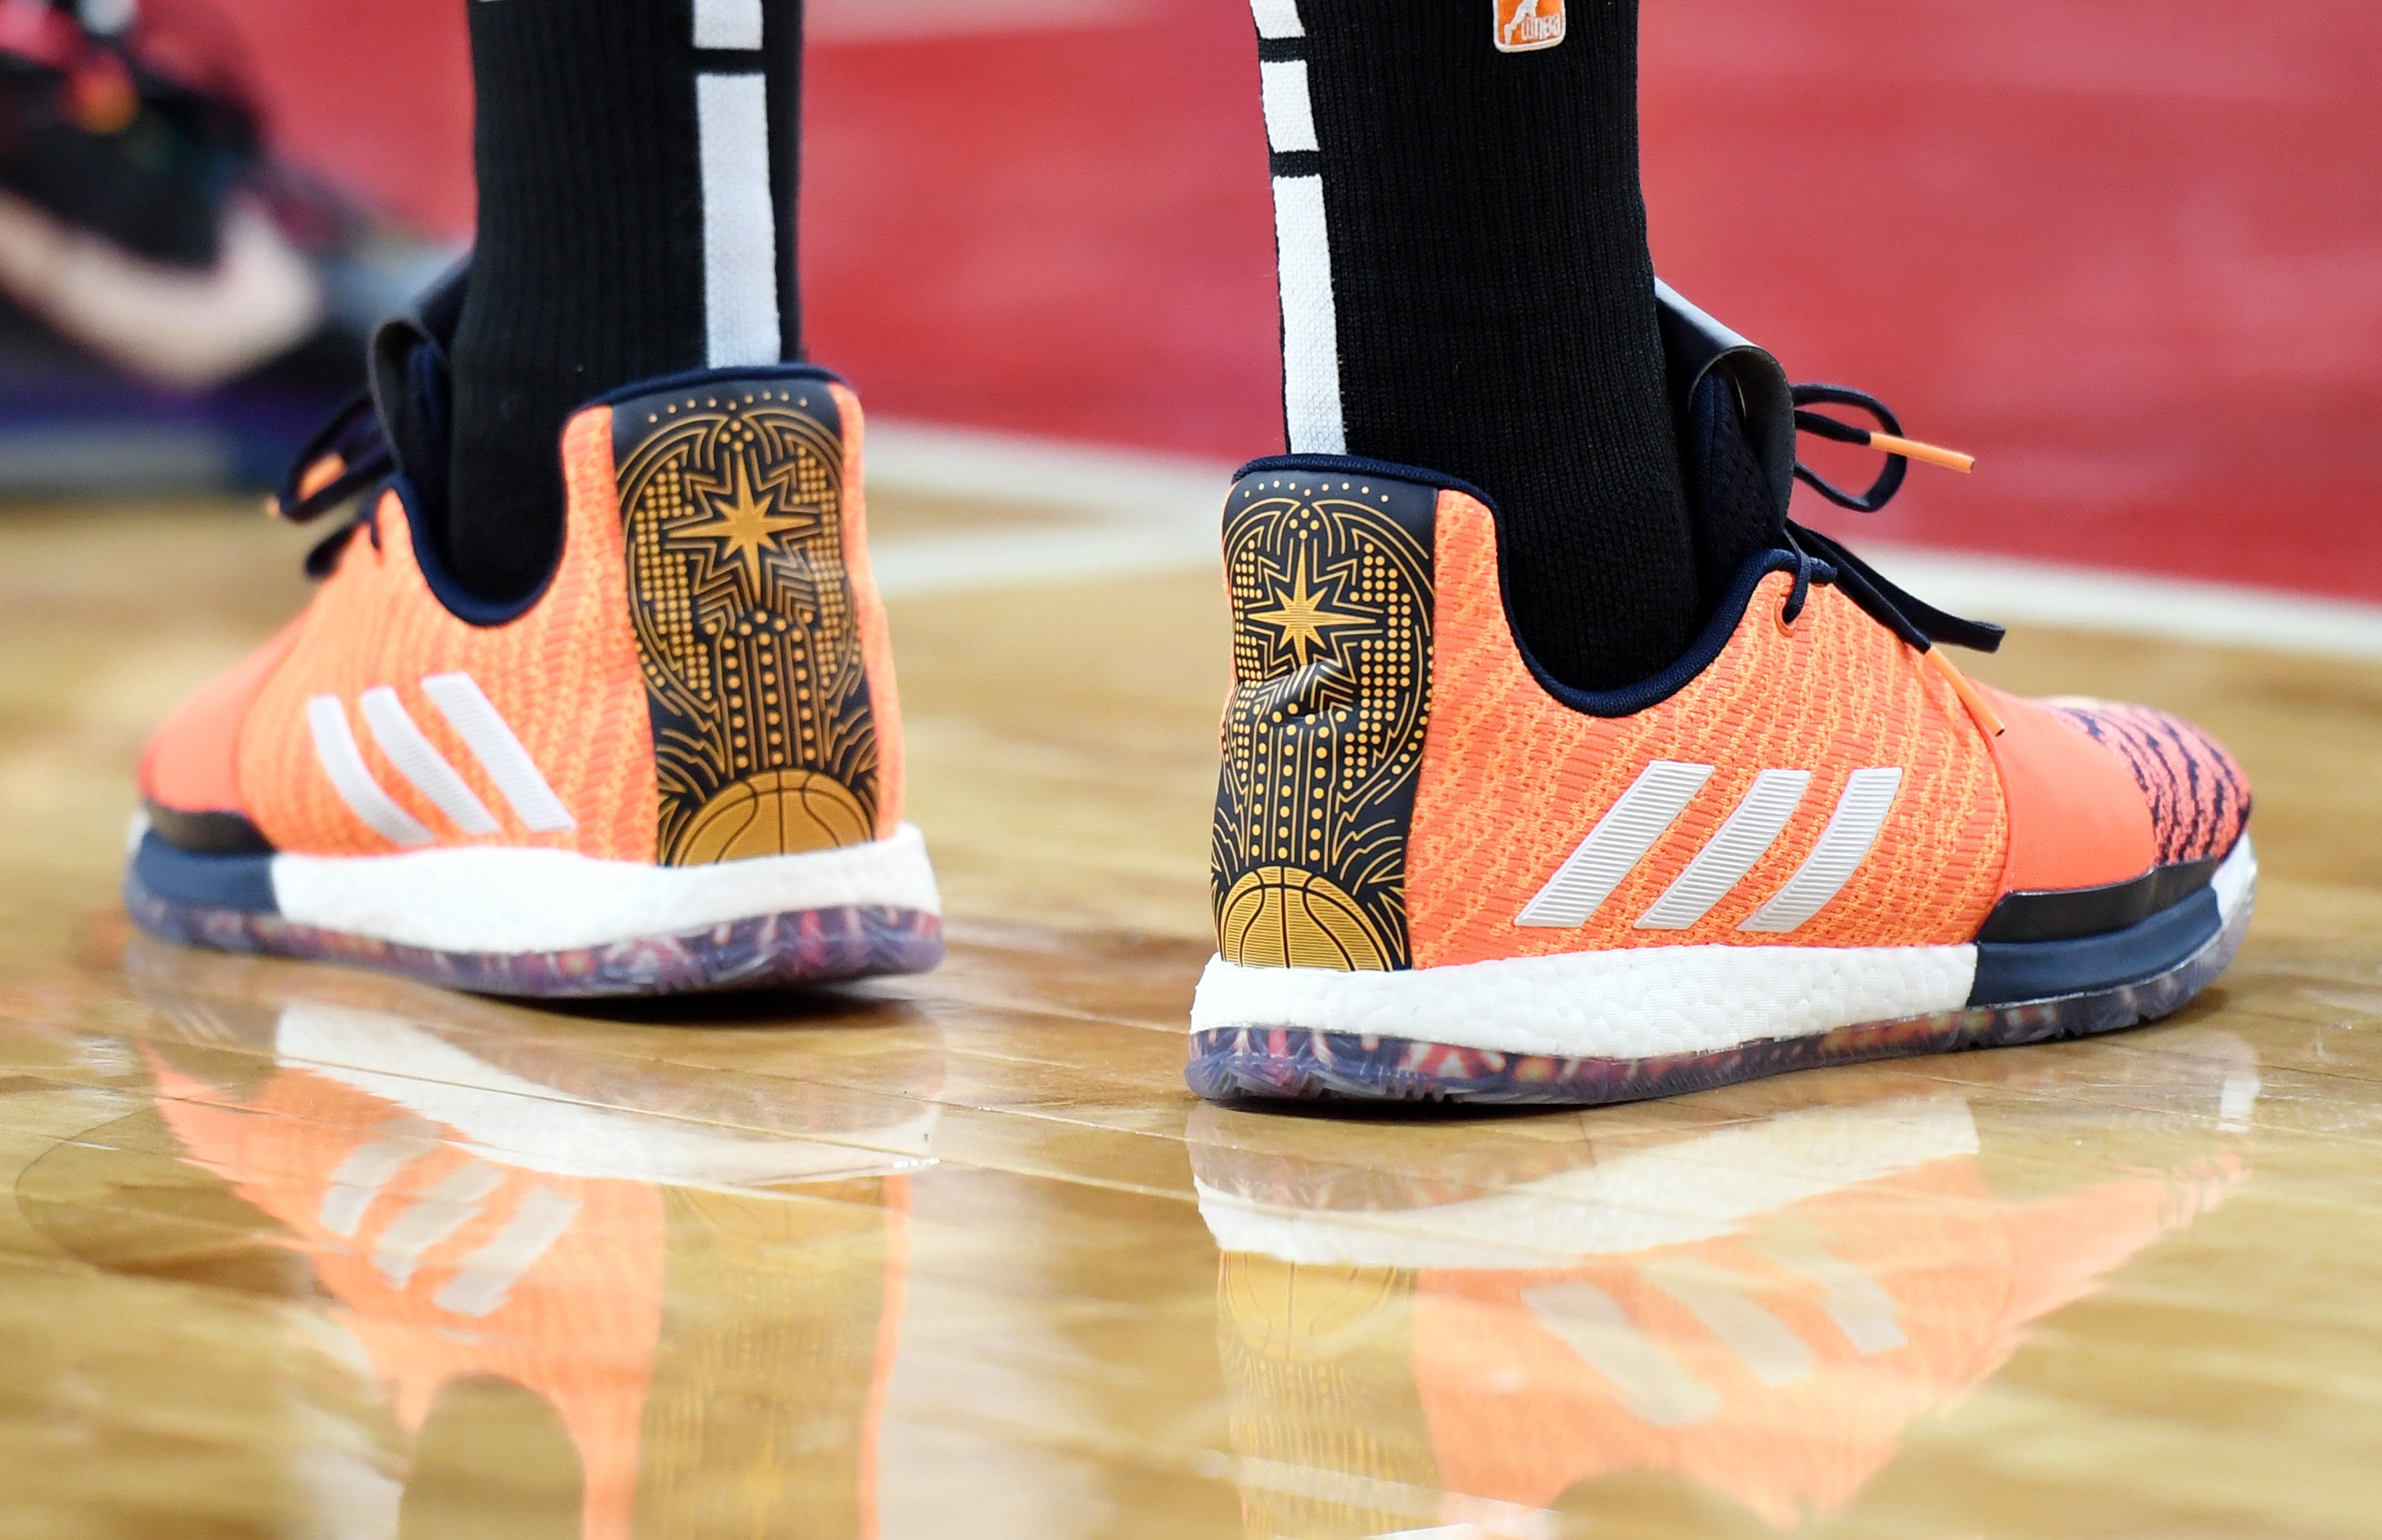 anfitrión Leia estas B/R Kicks on Twitter: ".@ecambage with the All-Star colorway of the Adidas  Harden Vol. 3 in Vegas. https://t.co/u1pZA25rHv" / Twitter